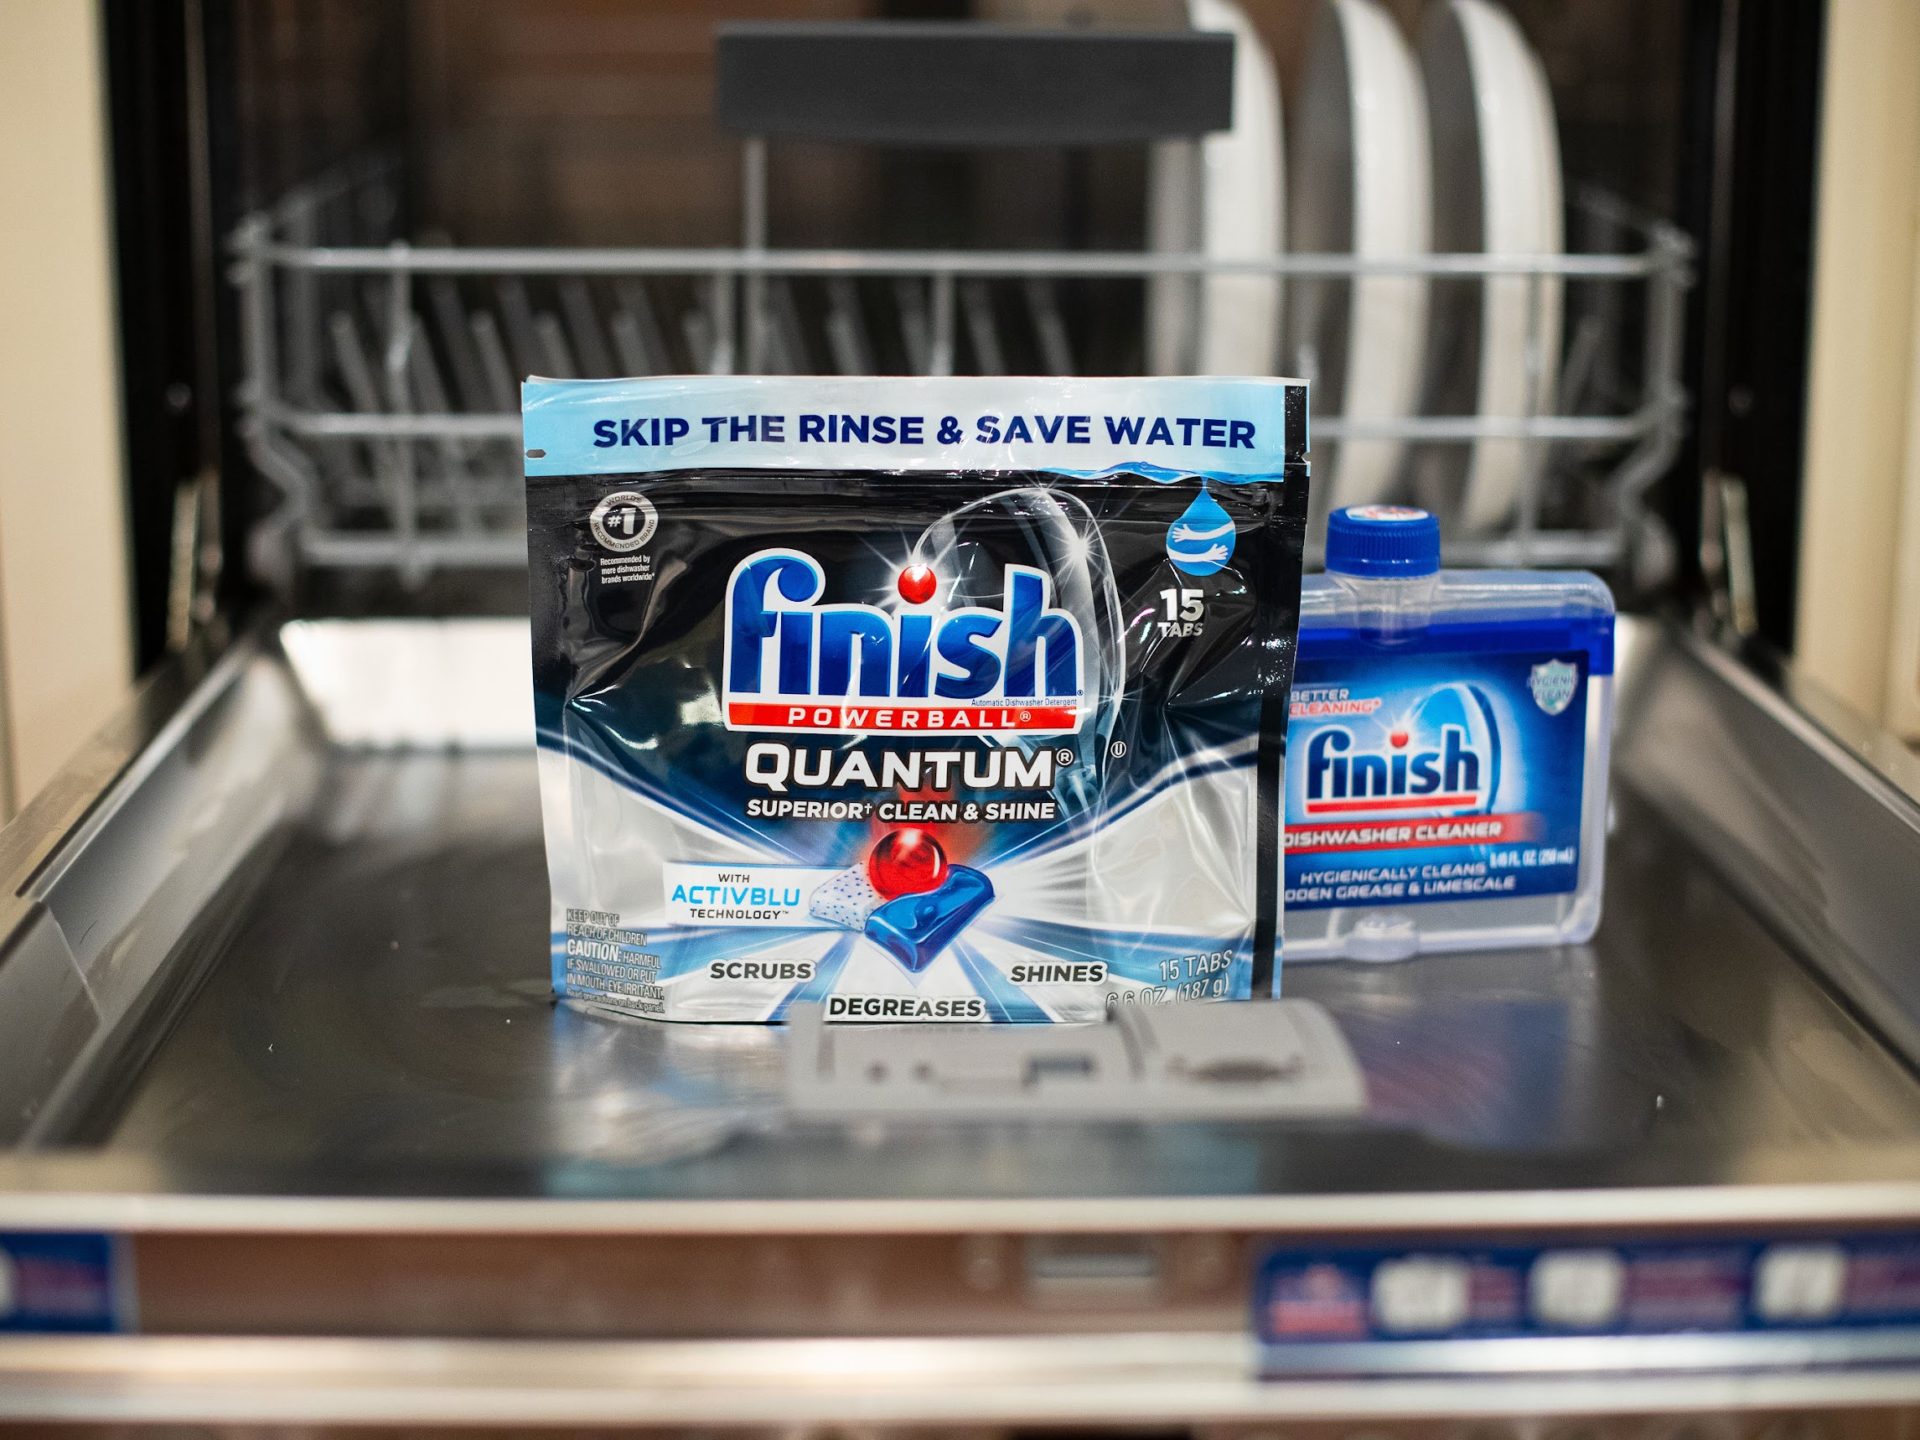 Super Deals On Finish Products At Kroger